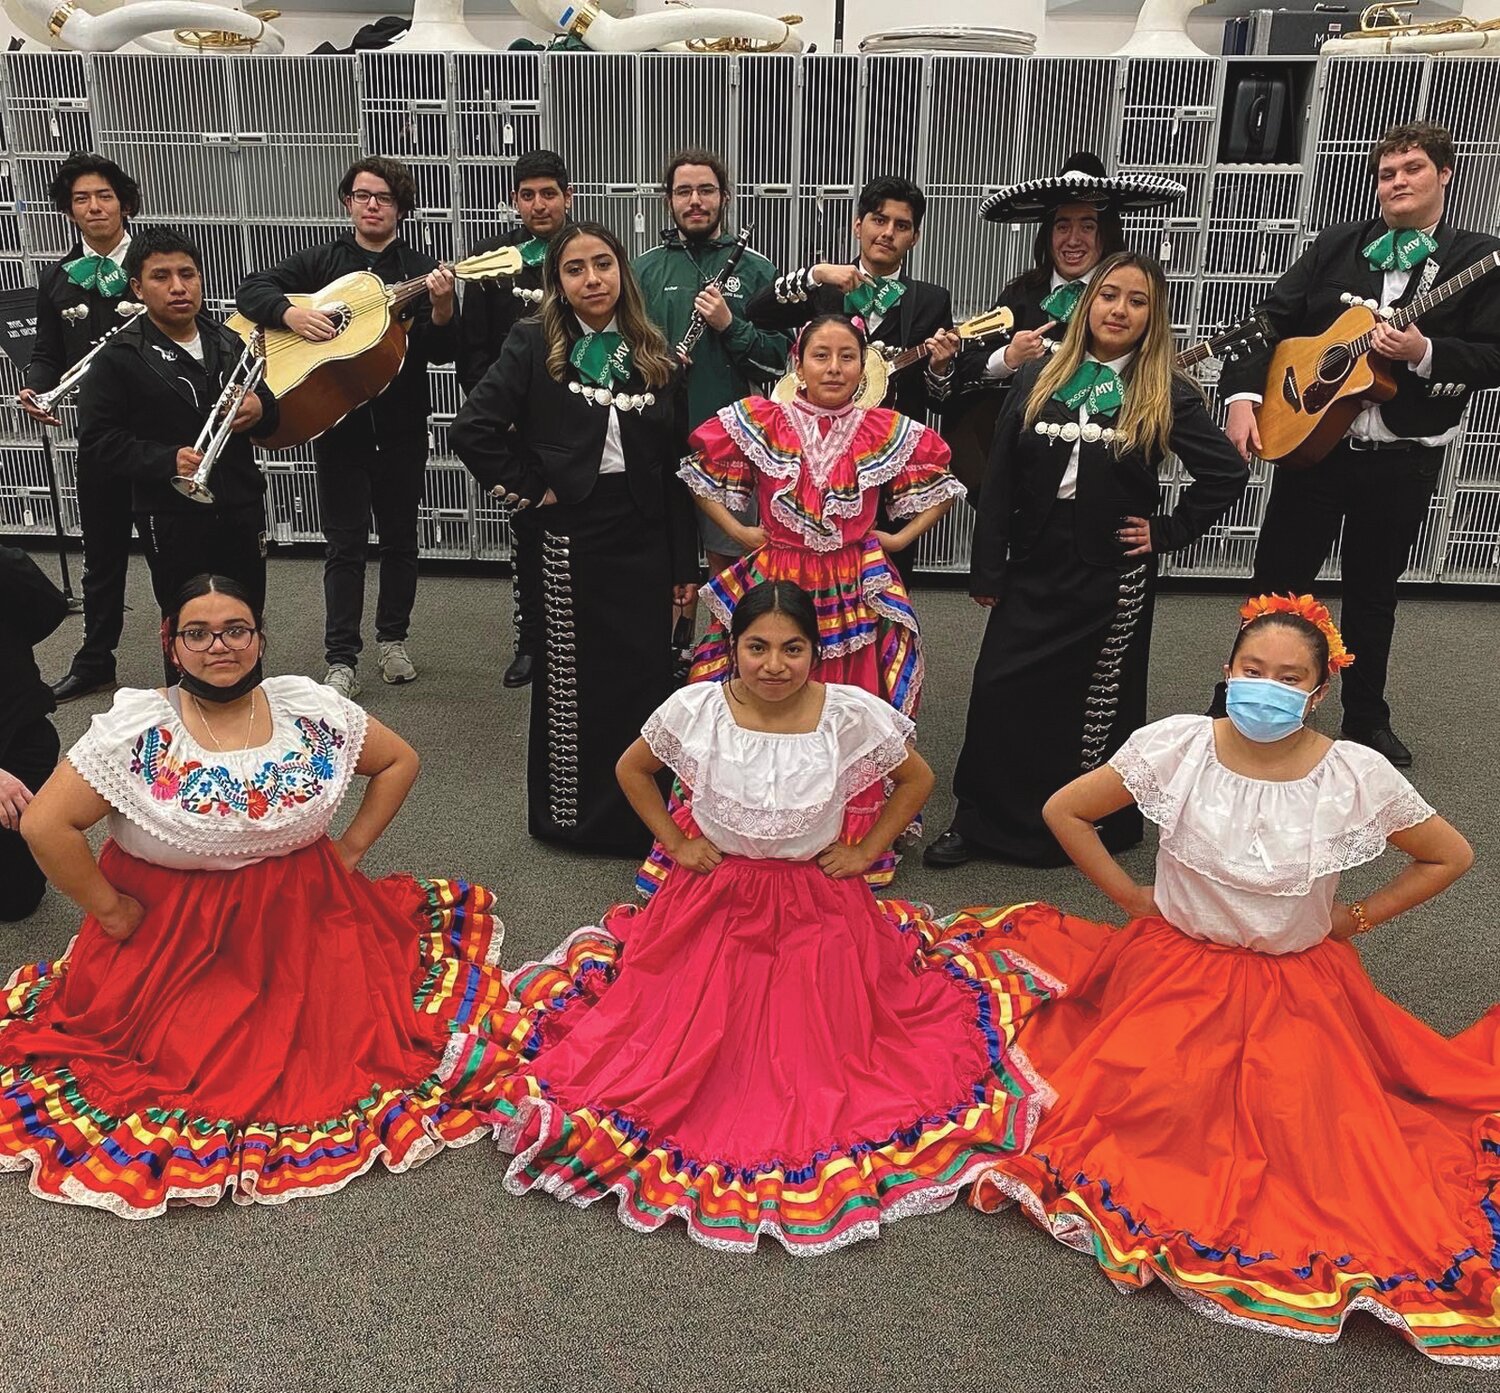 The Mount Vernon Mariachi group plays this summer at Lake Wenatchee State Park.
Courtesy Washington State Parks